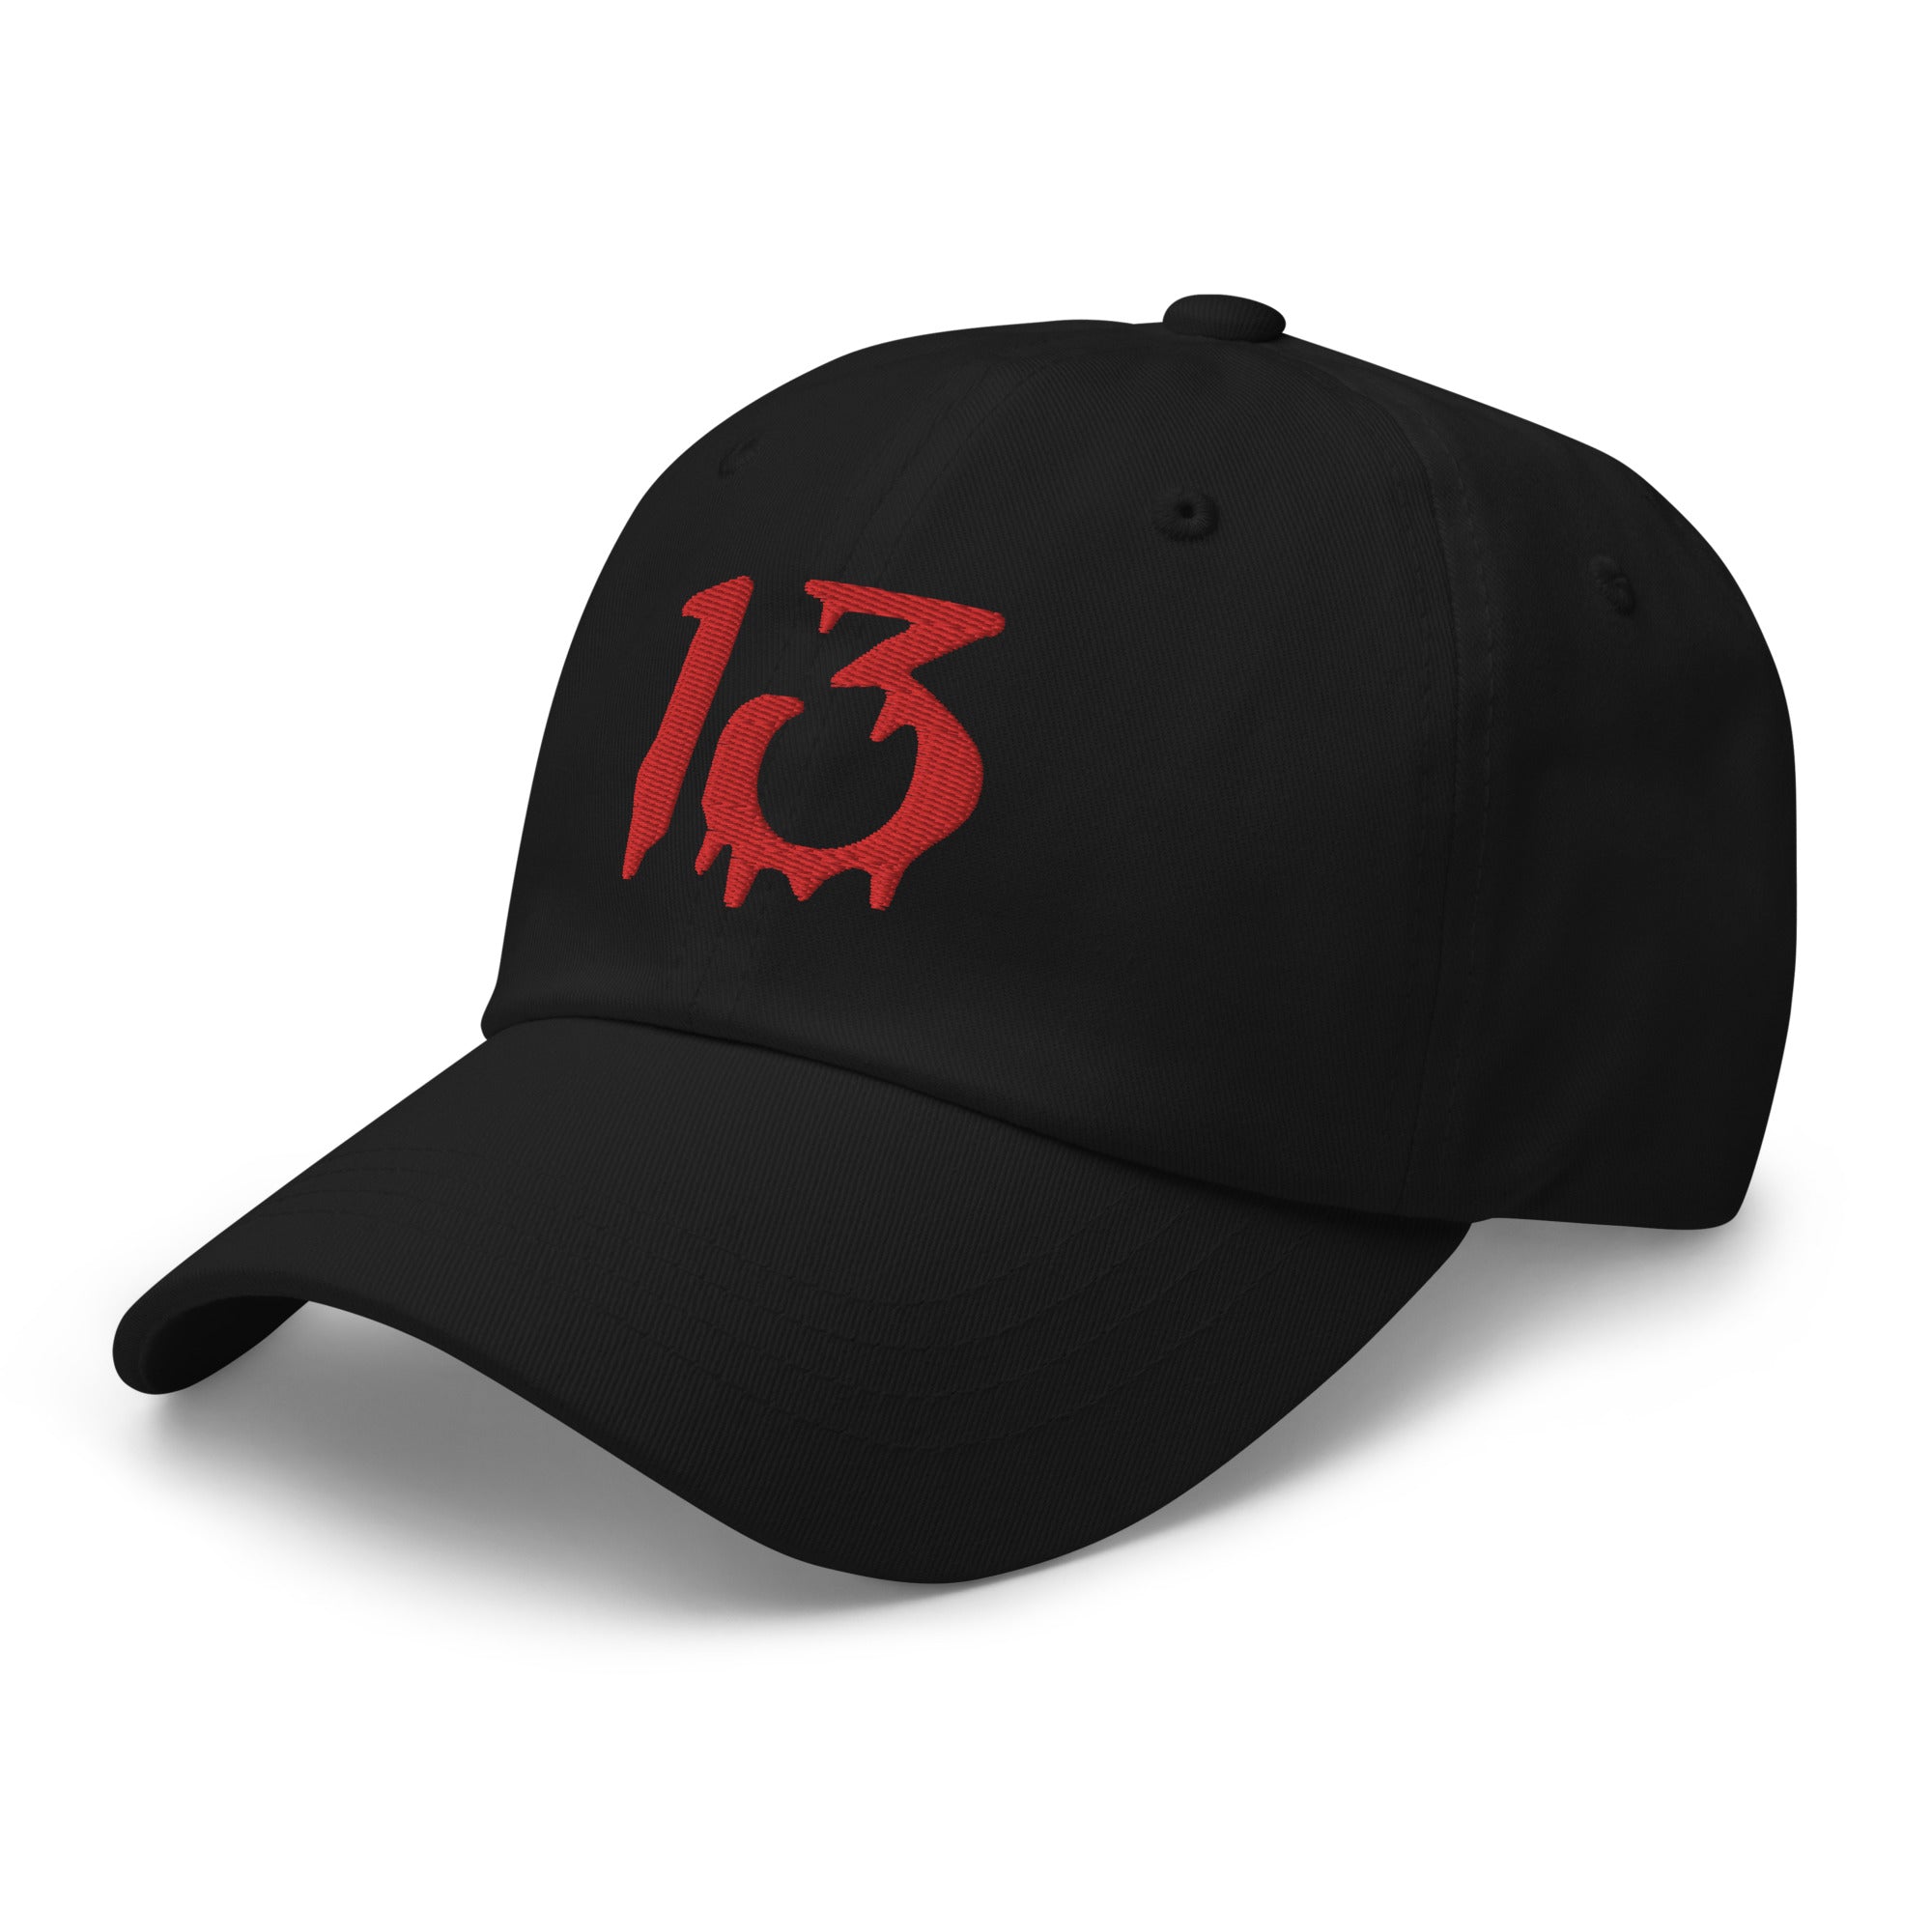 Bloody Number 13 Lucky Halloween Embroidered Baseball Cap Dad hat Red Thread - Edge of Life Designs